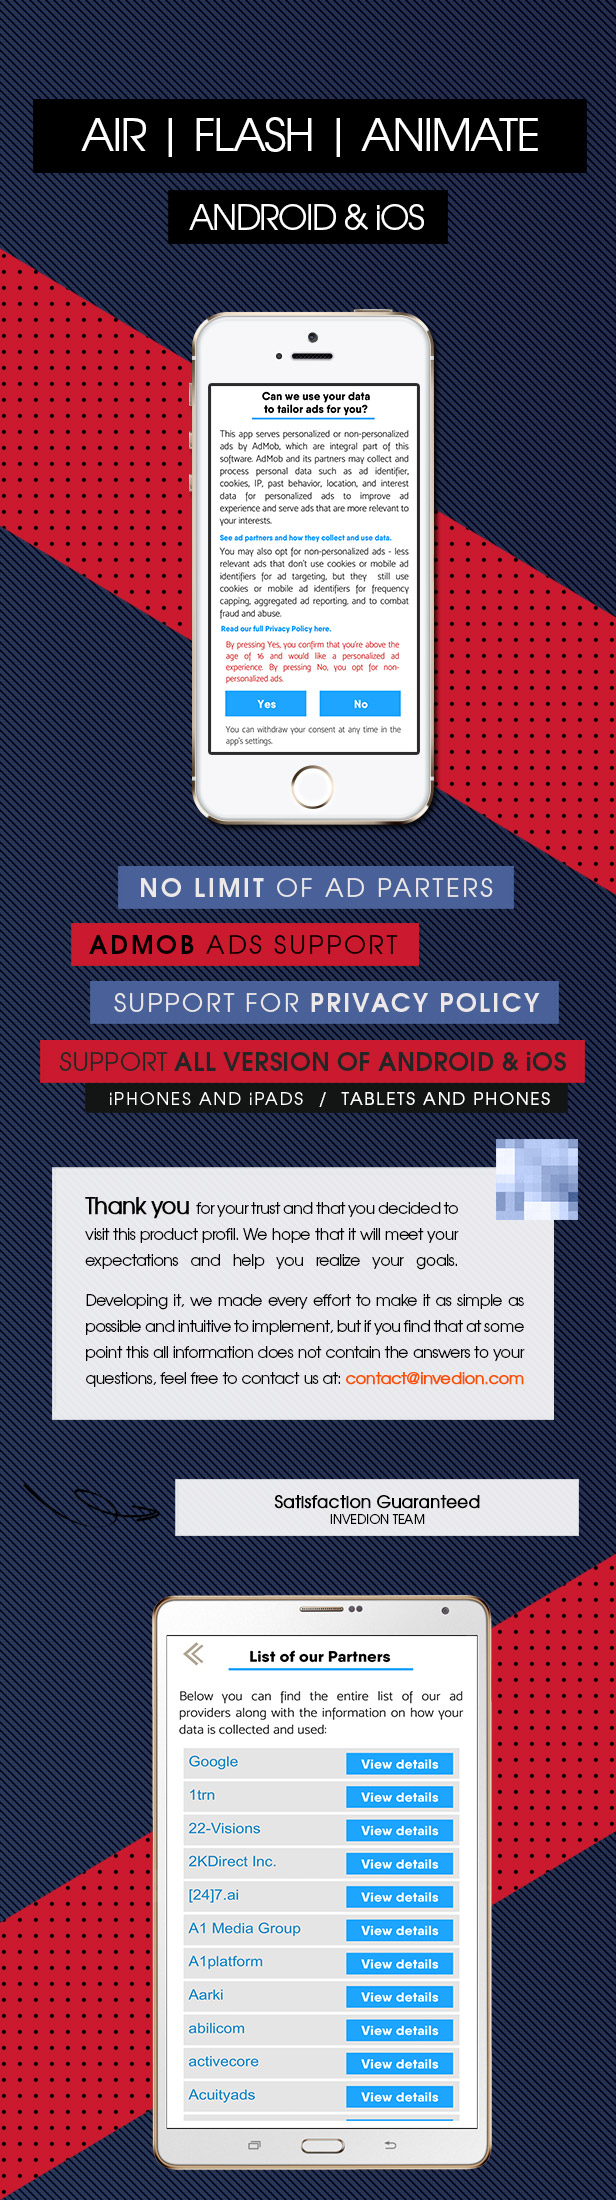 GDPR With AdMob Ads - EU Consent Policy 2020 [ Android & iOS ] - 2